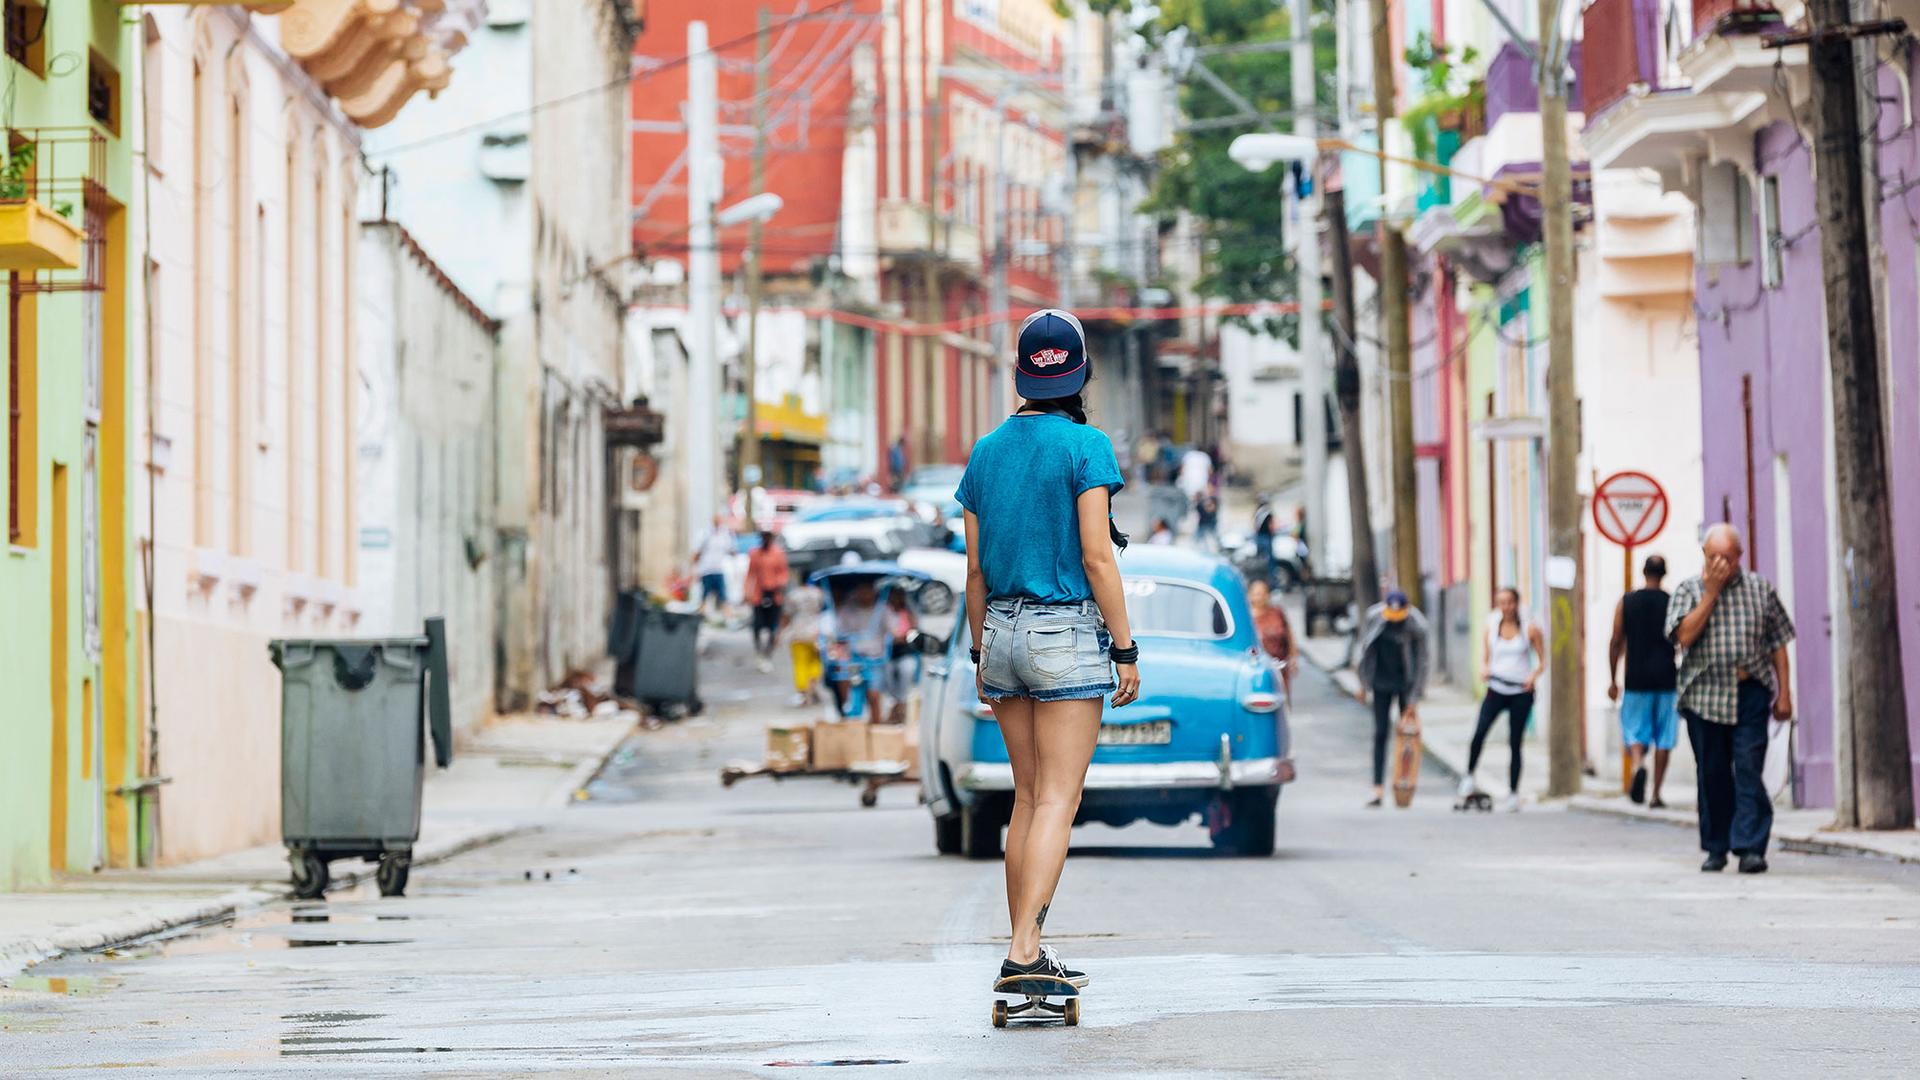 Ariadna Pérez Ballester is the only female skater in Camagüey, a city of 300,000 in central Cuba.